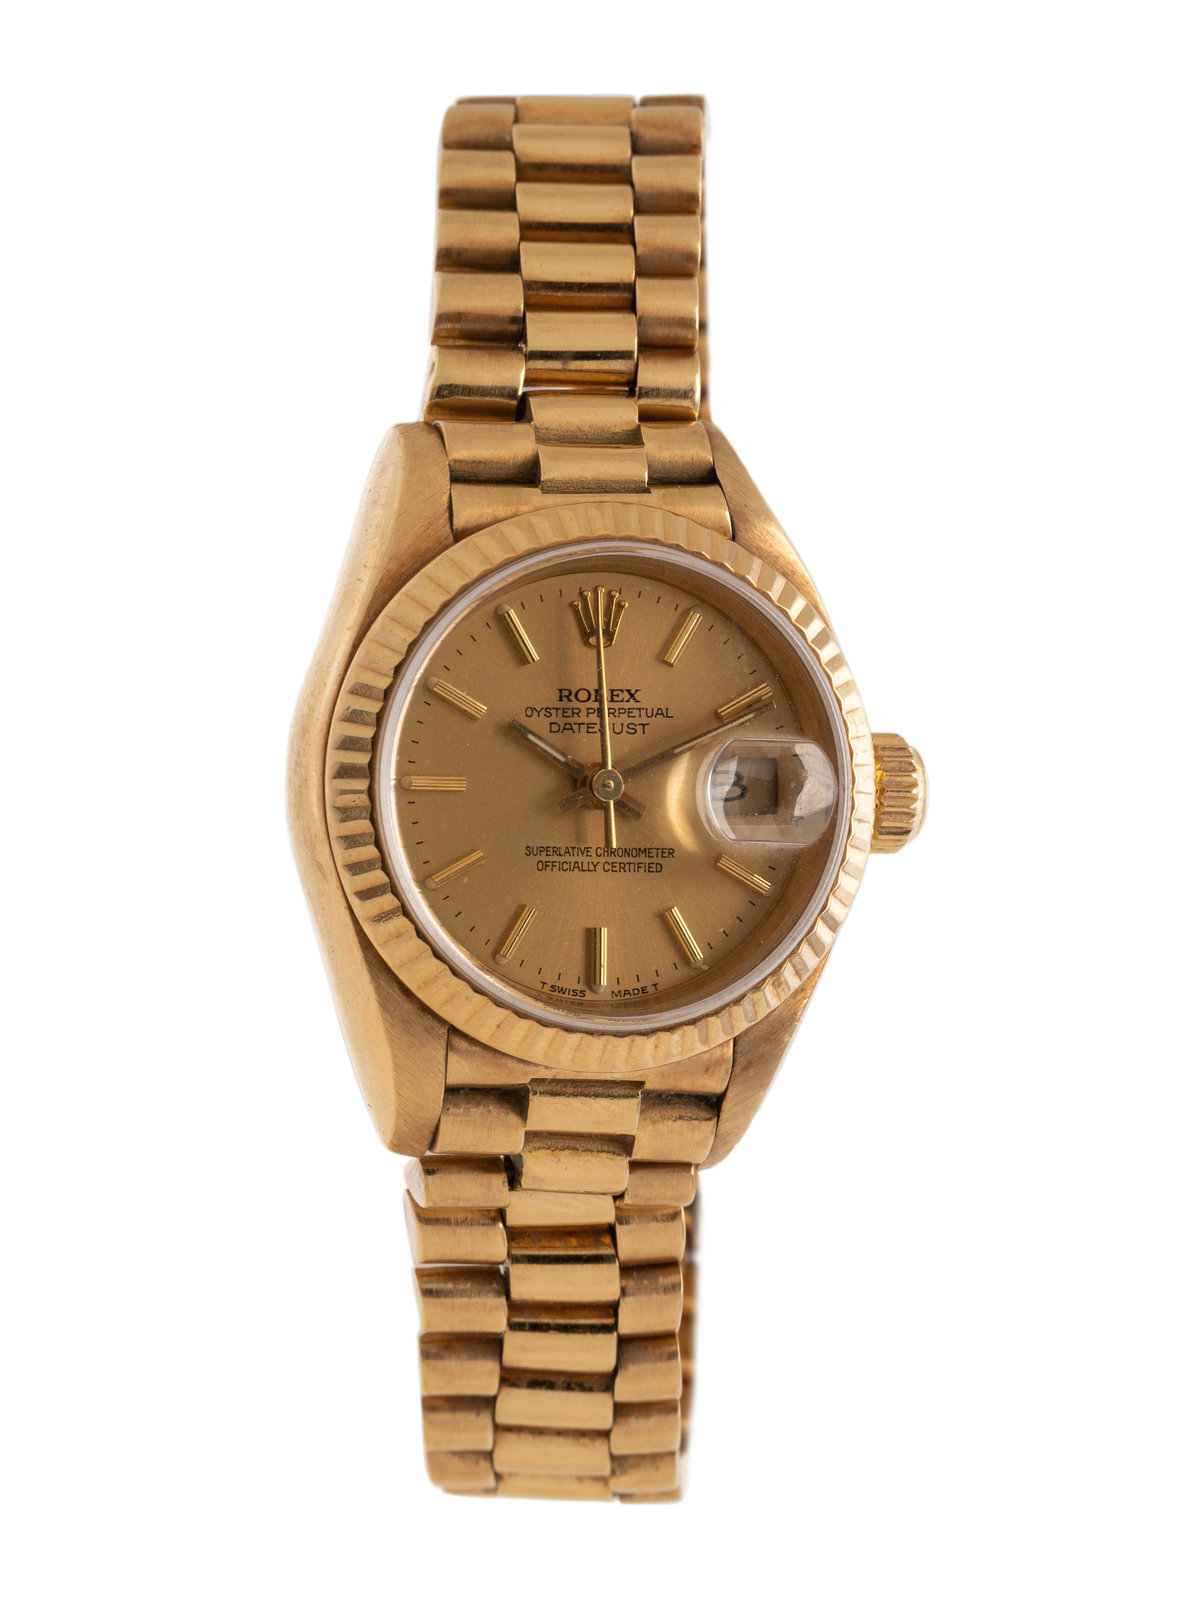 ROLEX, REF. 69178 18K YELLOW GOLD 'OYSTER PERPETUAL DATEJUST' WATCH